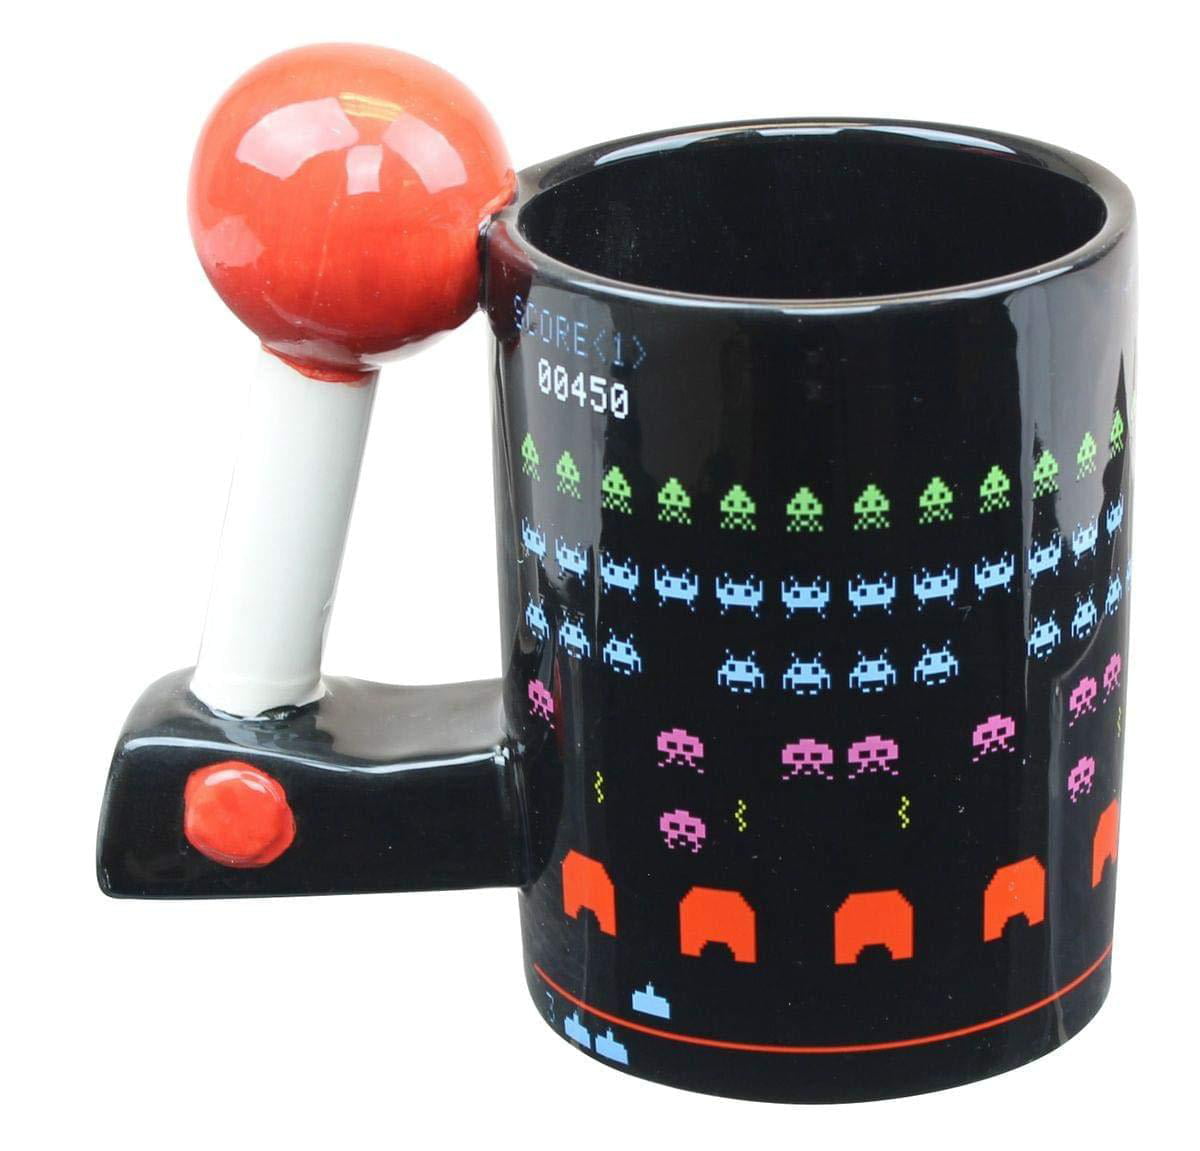 Retro Arcade Colour Changing Space Invaders Gaming Mug with Joystick Handle 